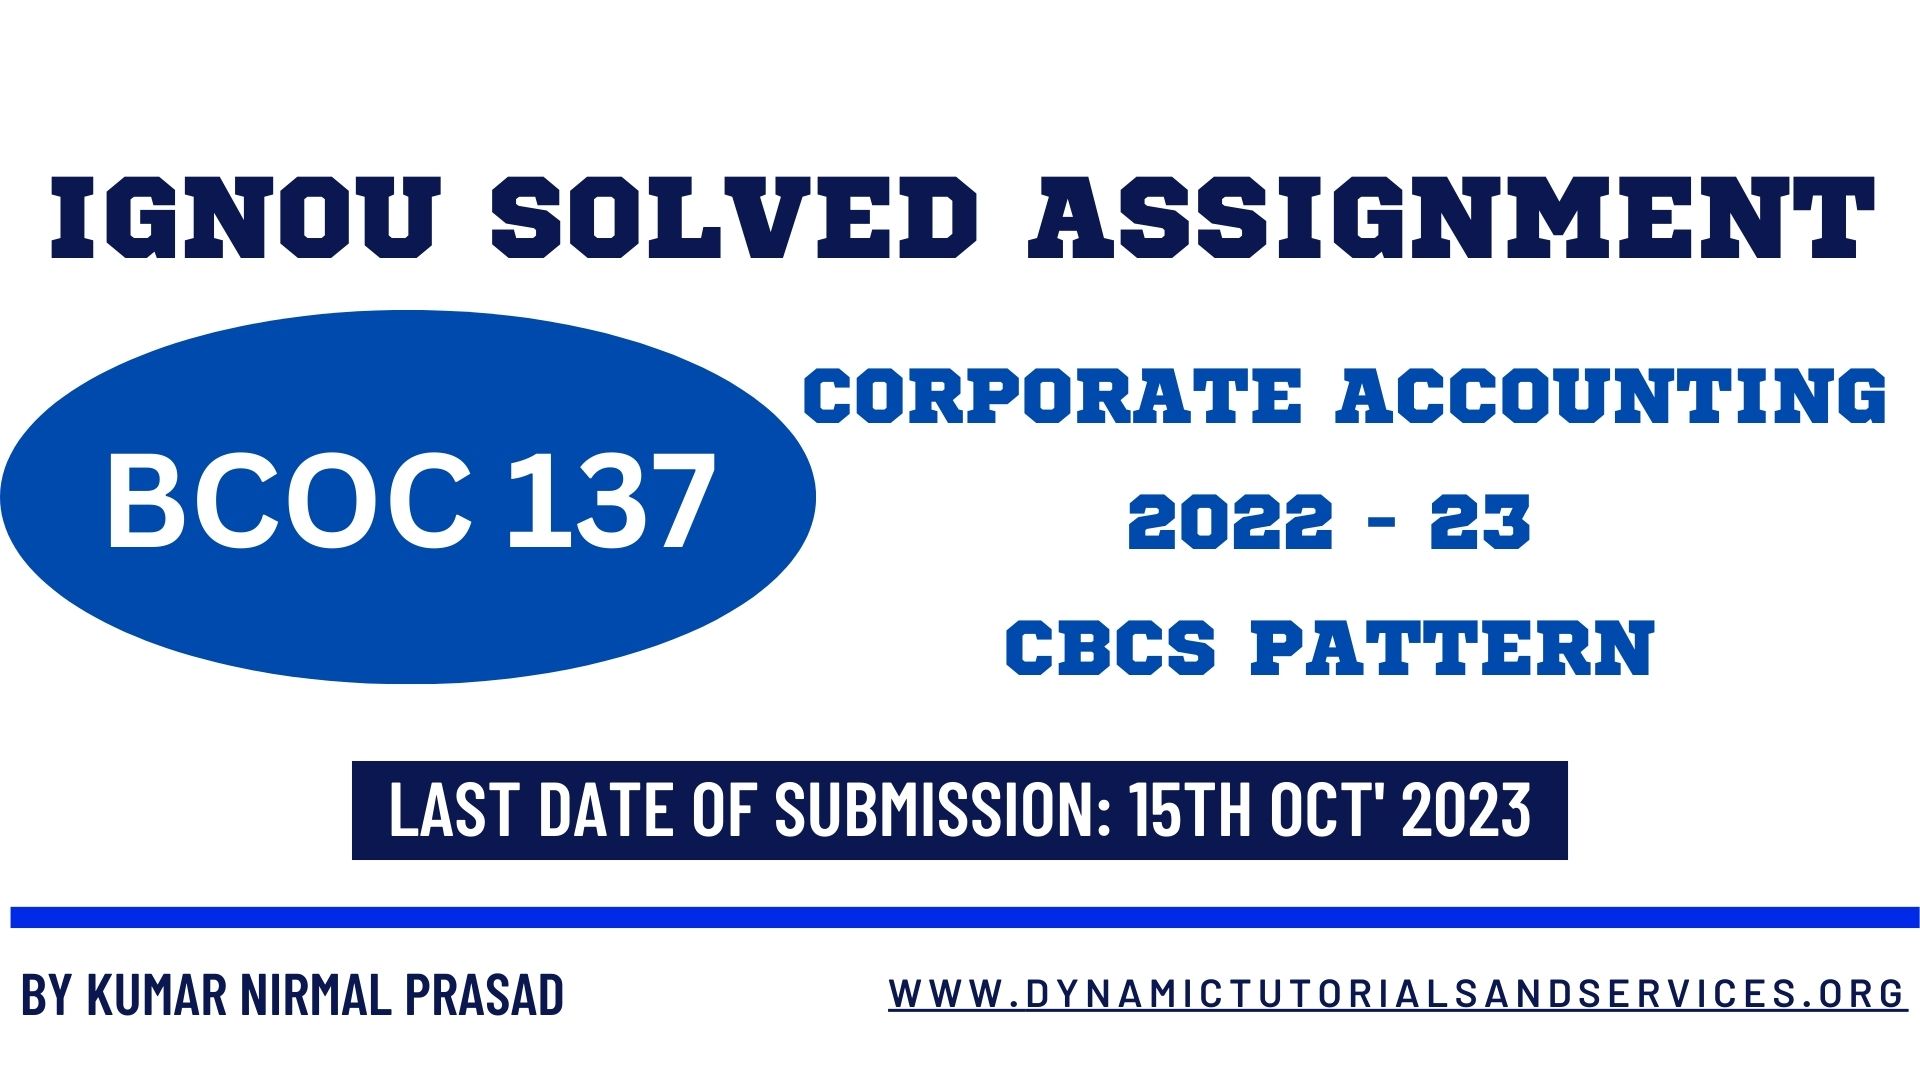 BCOC 137 Corporate Accounting Solved Assignment 2022 - 23